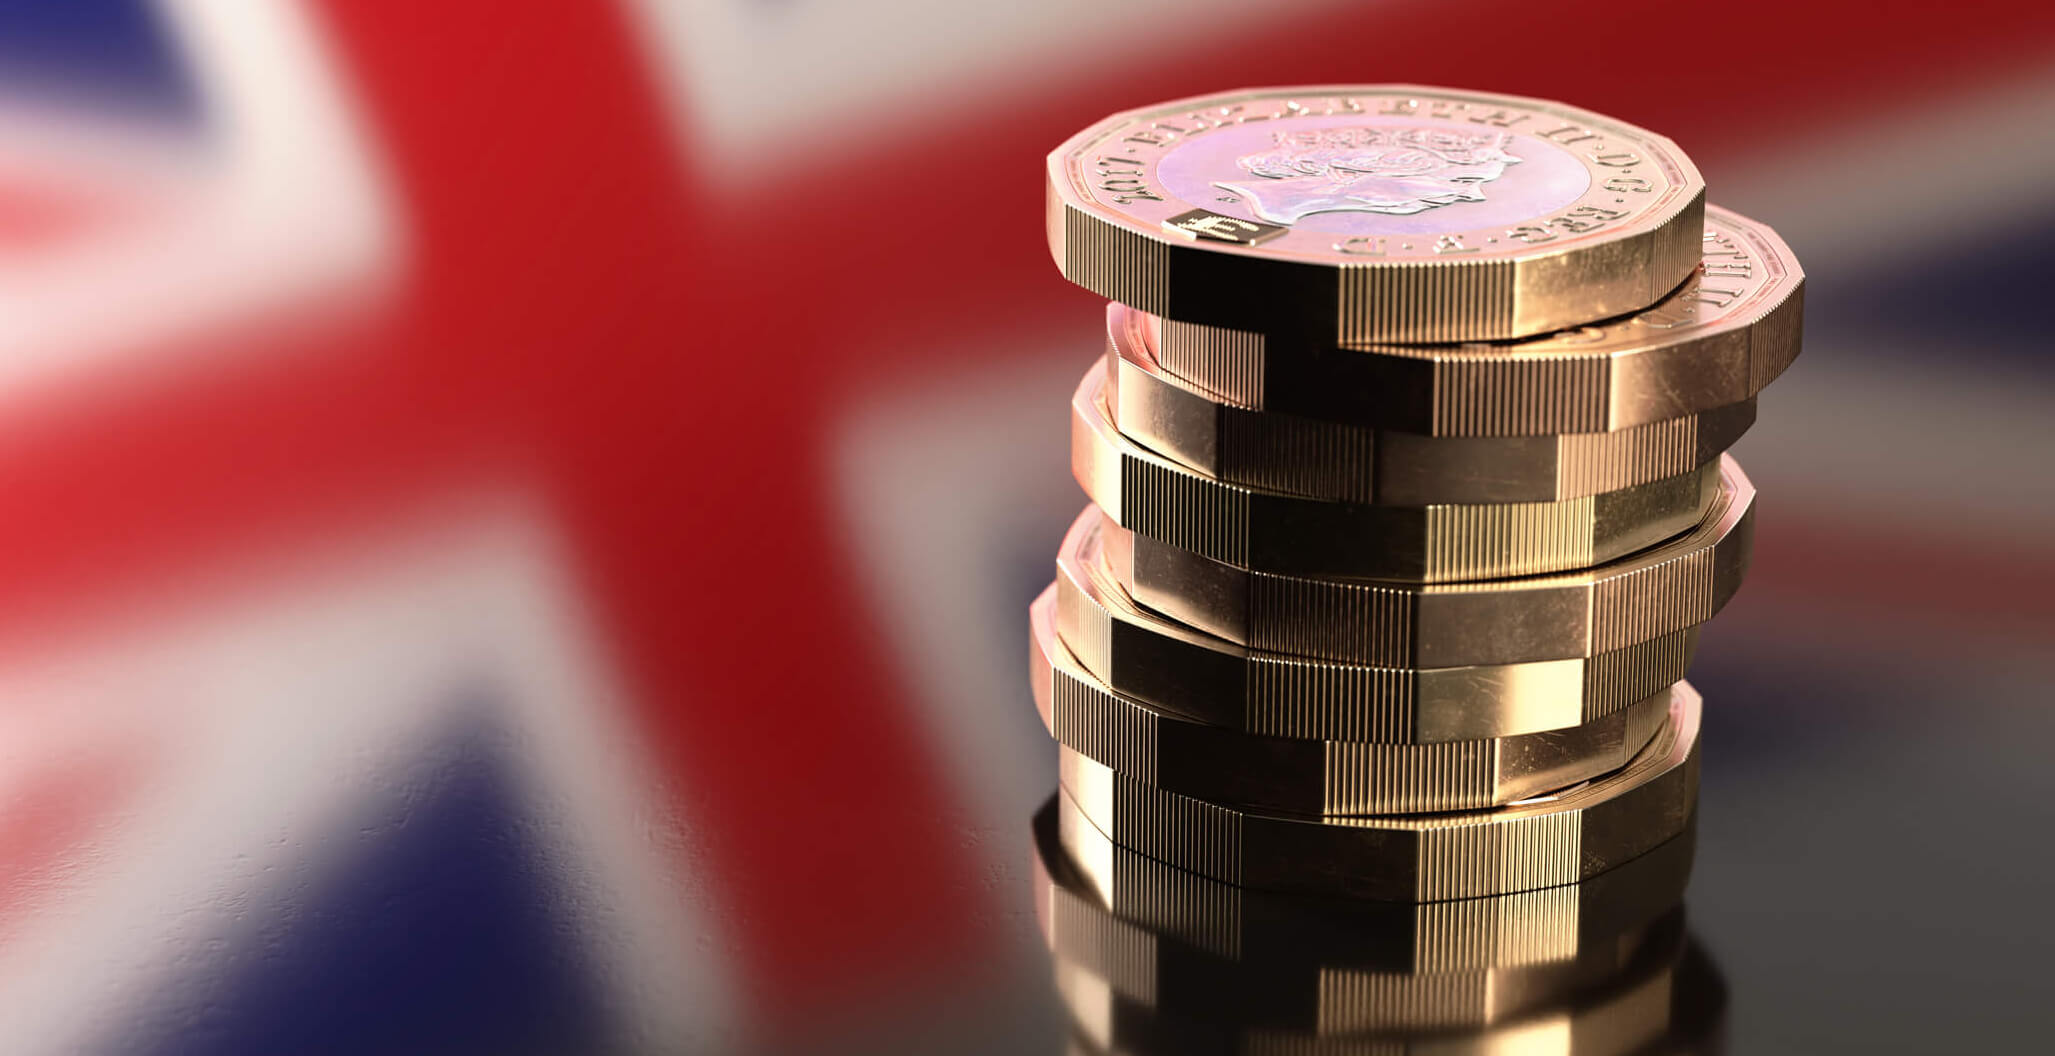 Sterling Gains But Cautious Ahead of BoE Meeting